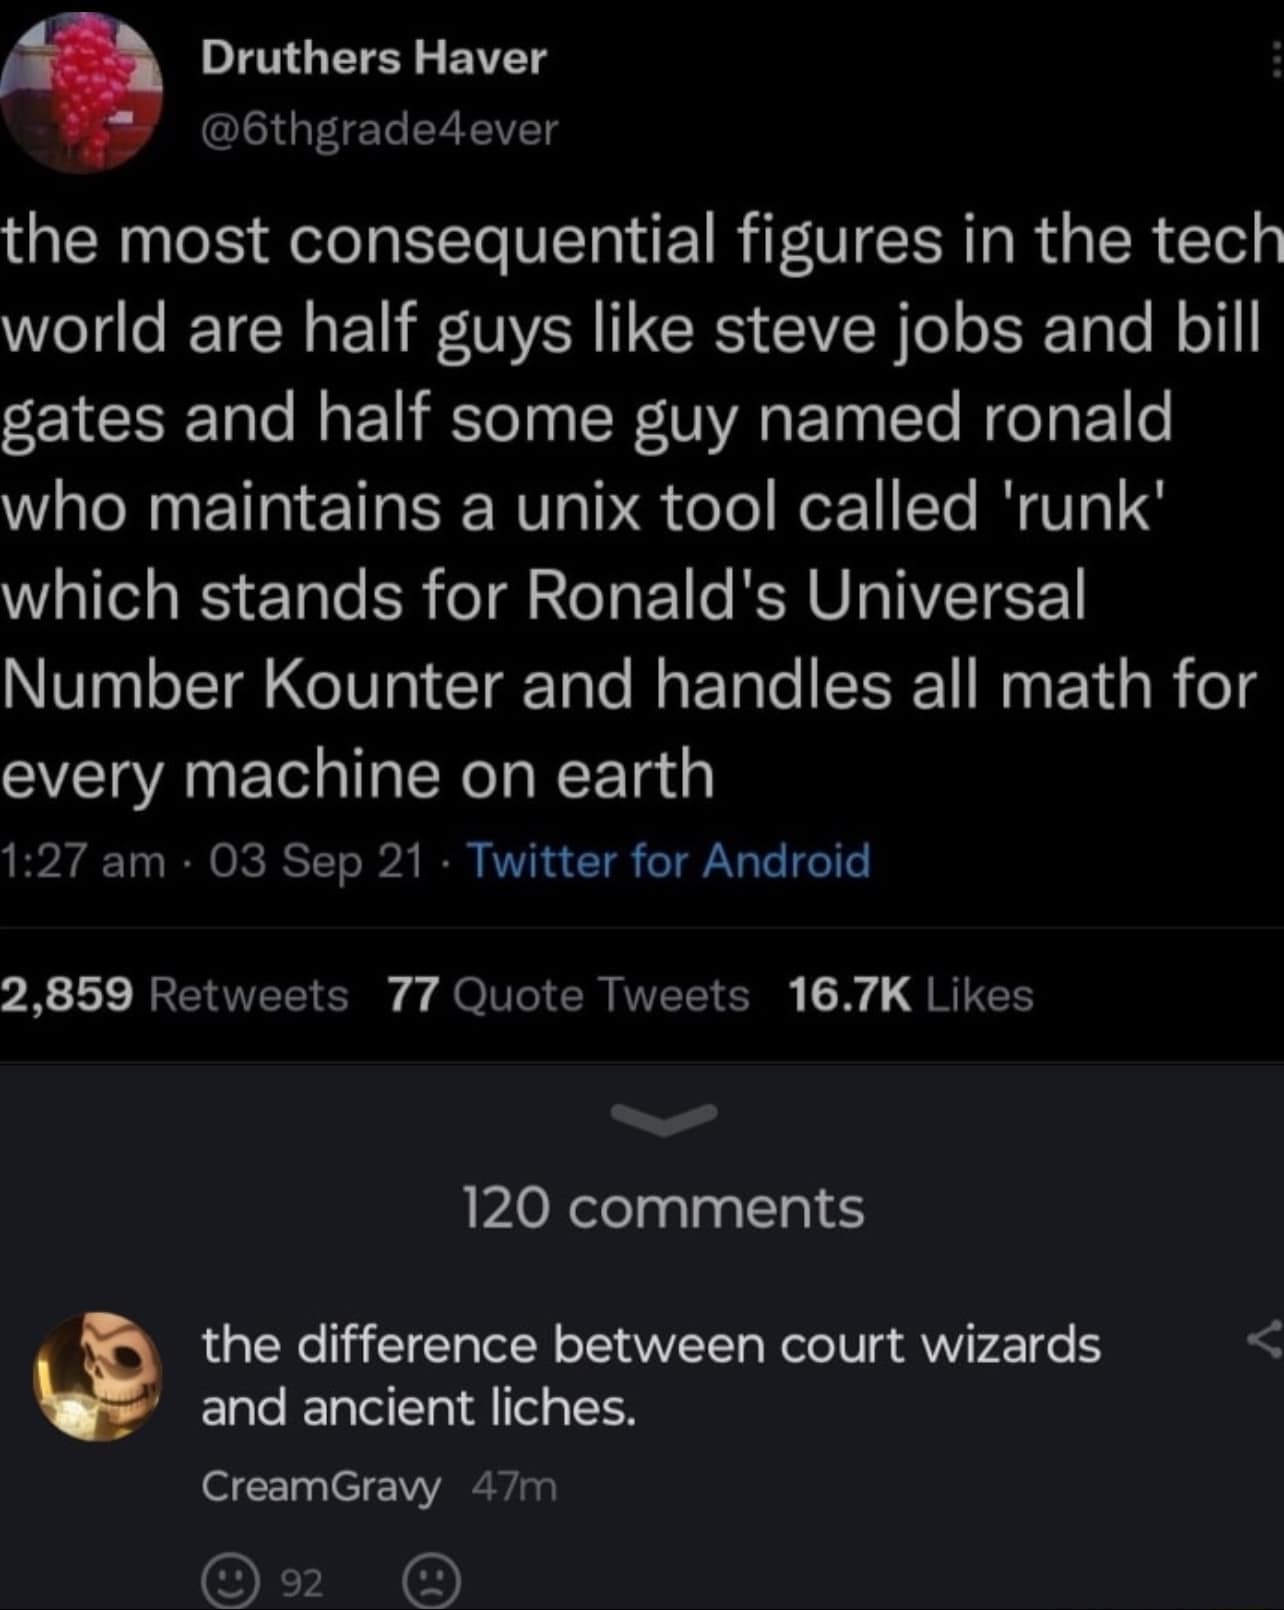 The difference between court wizards and ancient liches